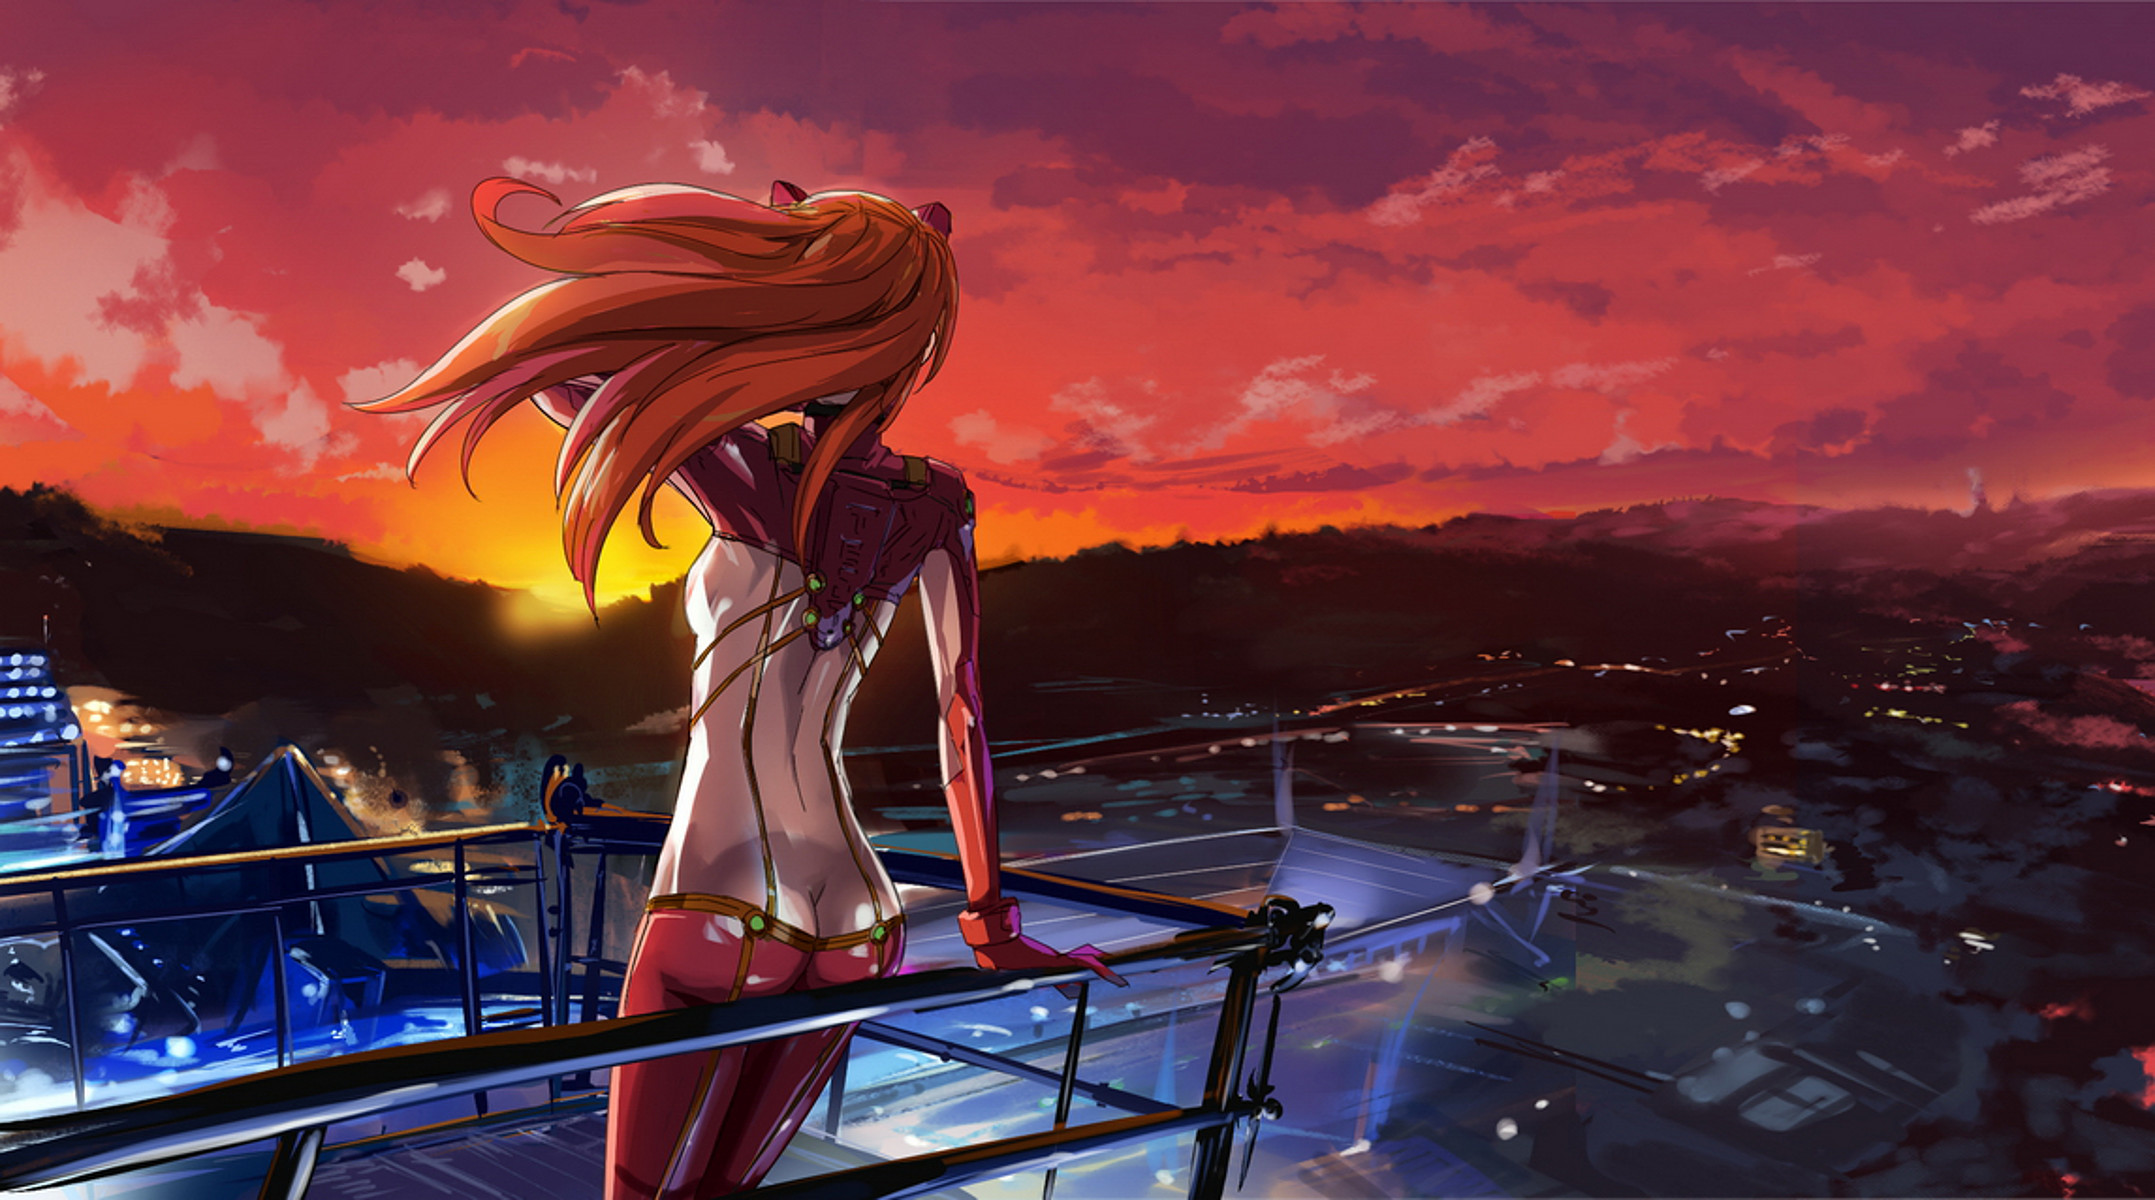 2155x1200 Evangelion Wallpapers Full HD wallpaper search page